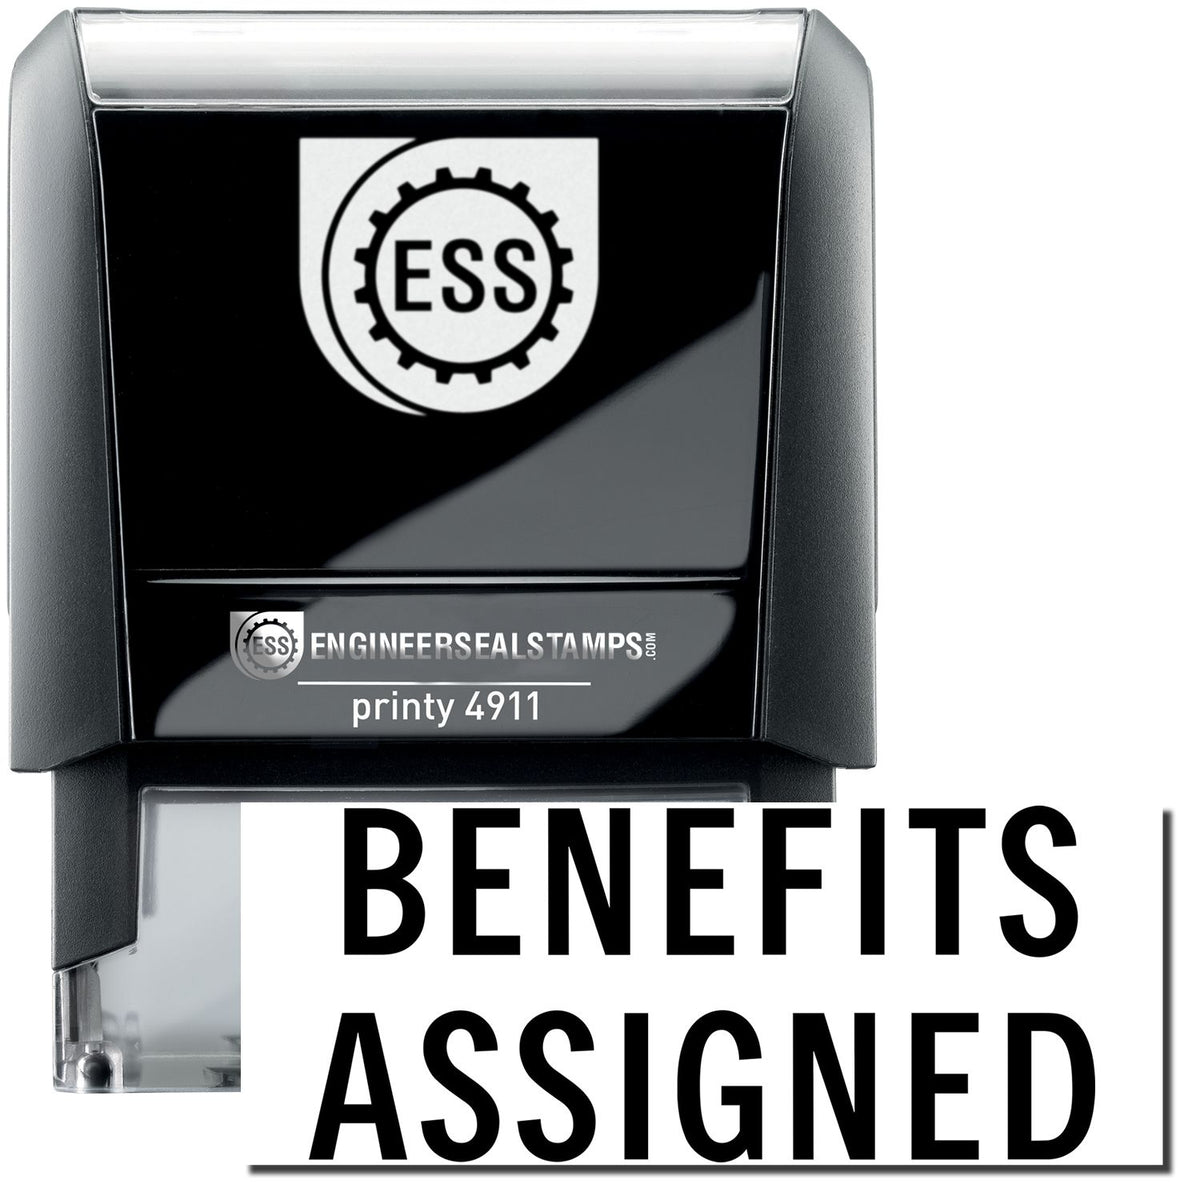 A self-inking stamp with a stamped image showing how the text &quot;BENEFITS ASSIGNED&quot; is displayed after stamping.